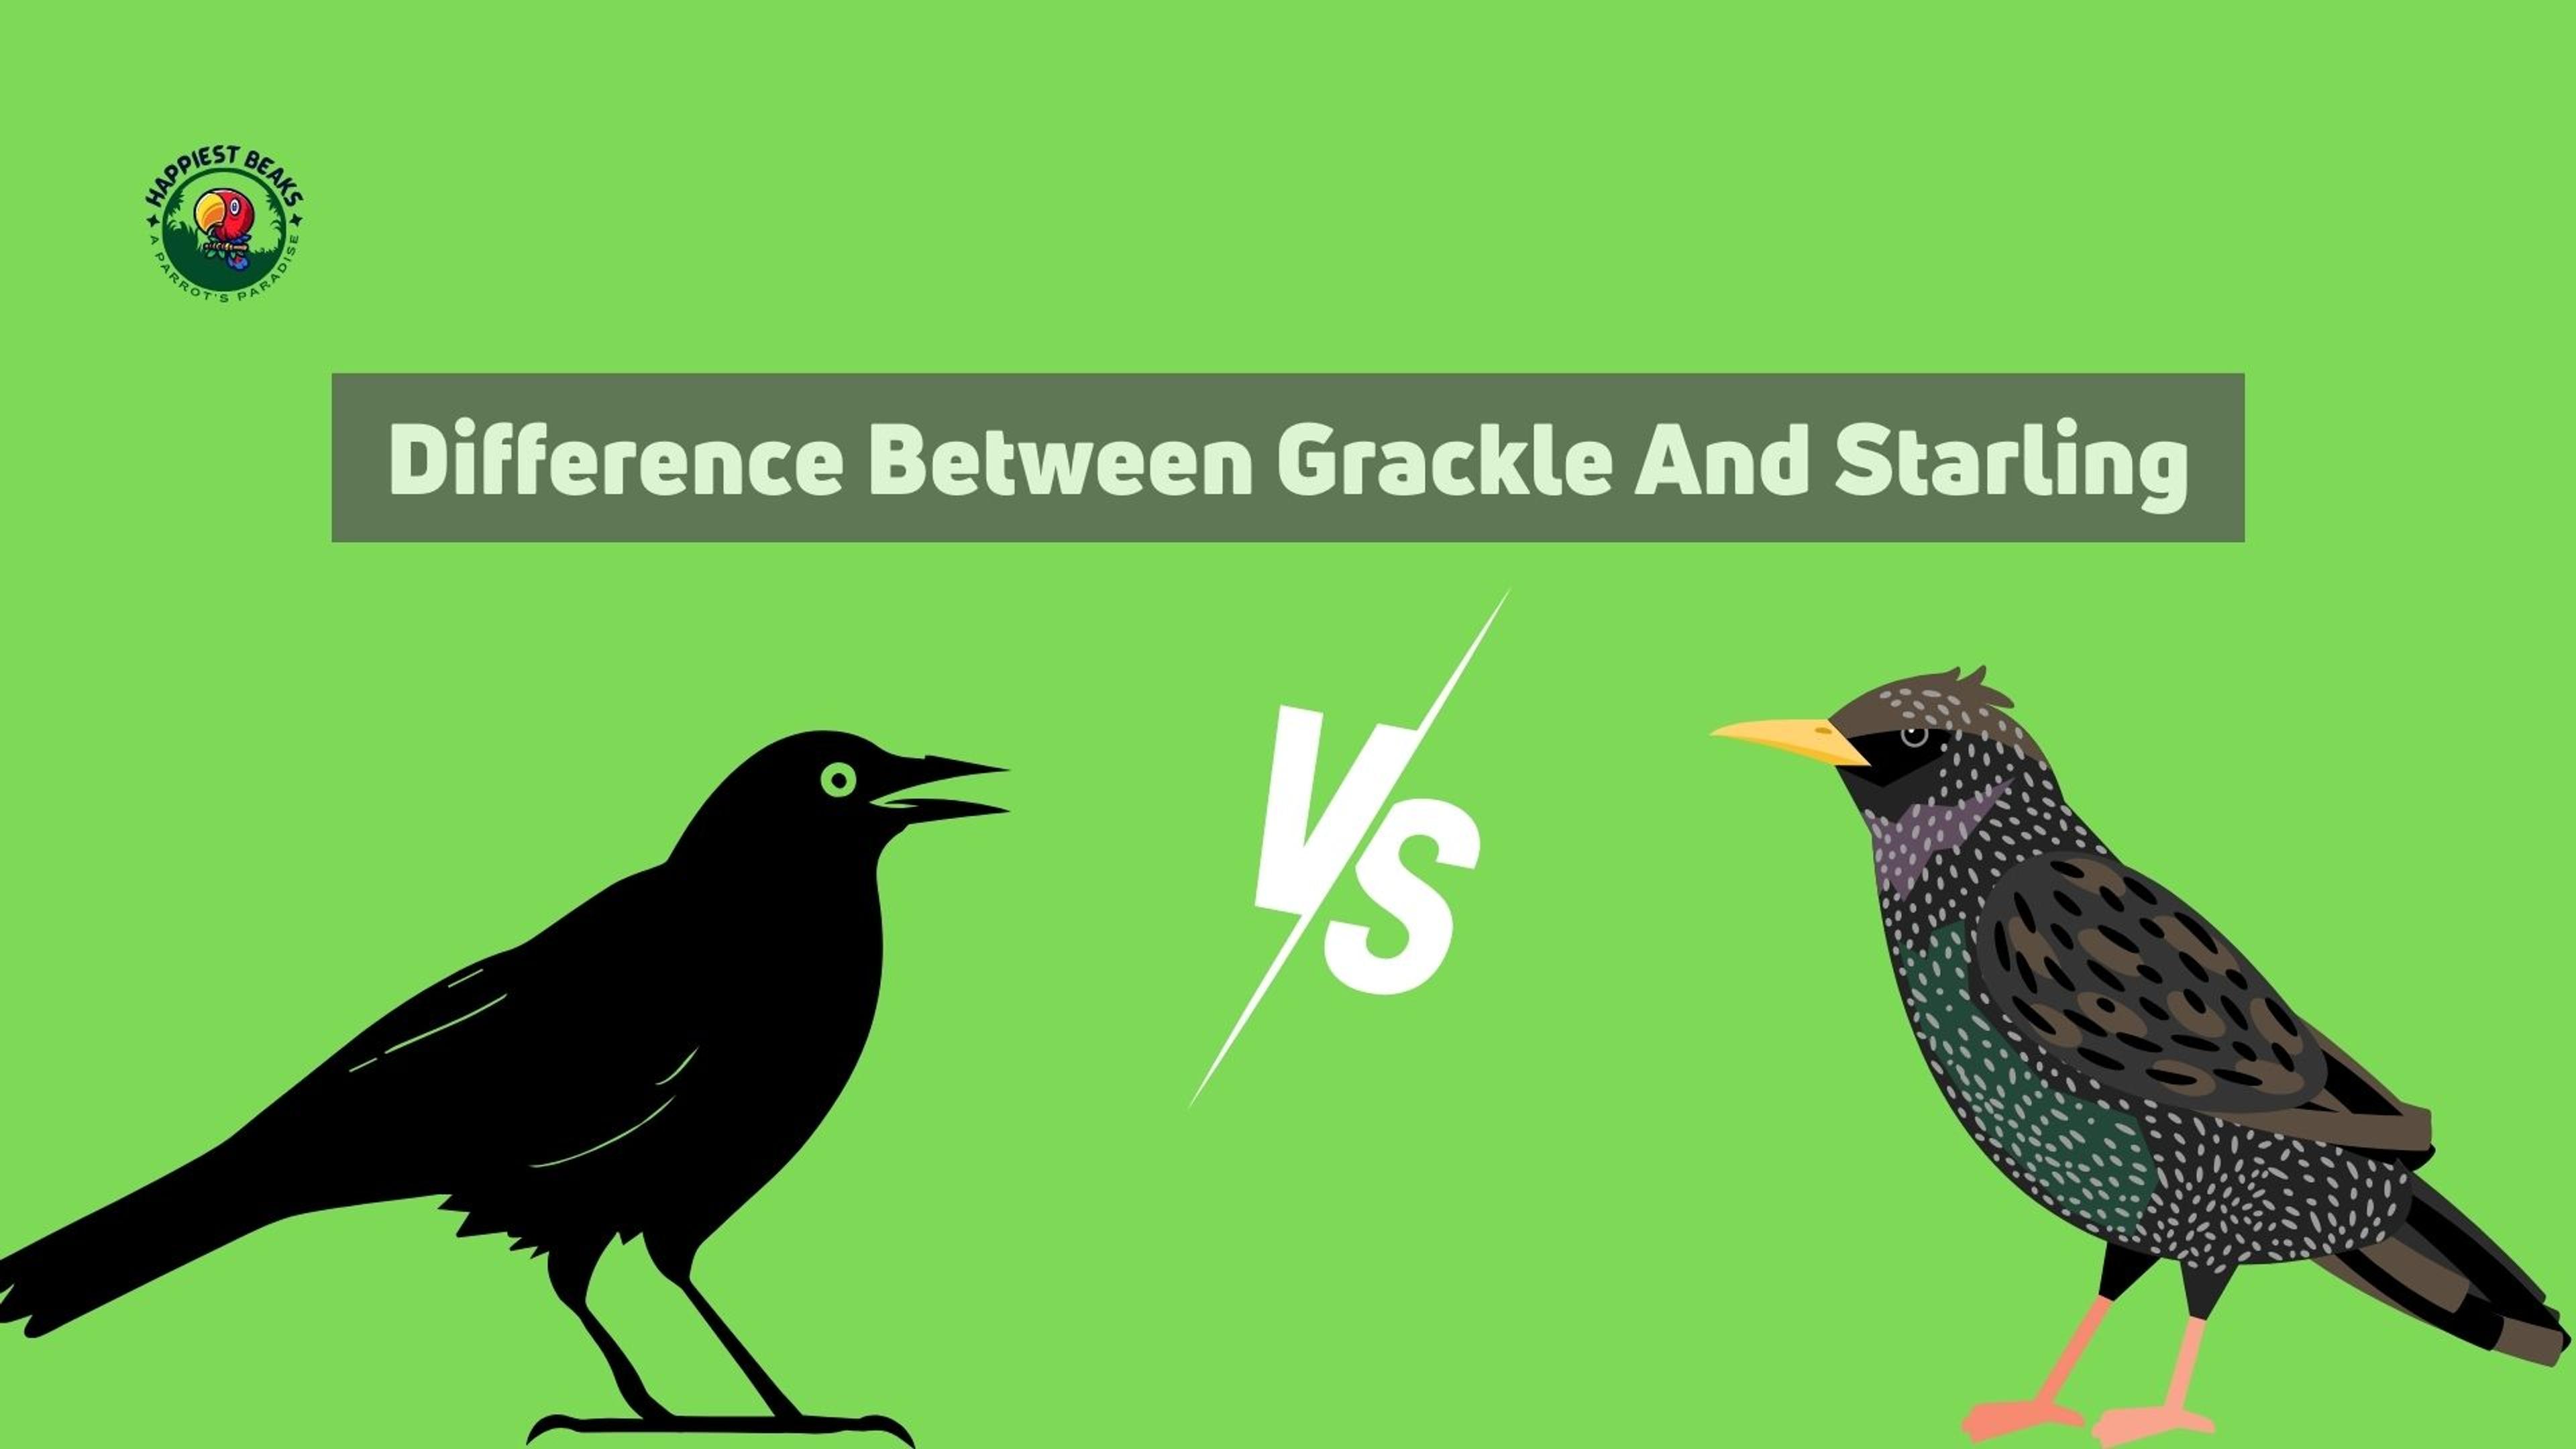 Difference Between Grackle and Starling